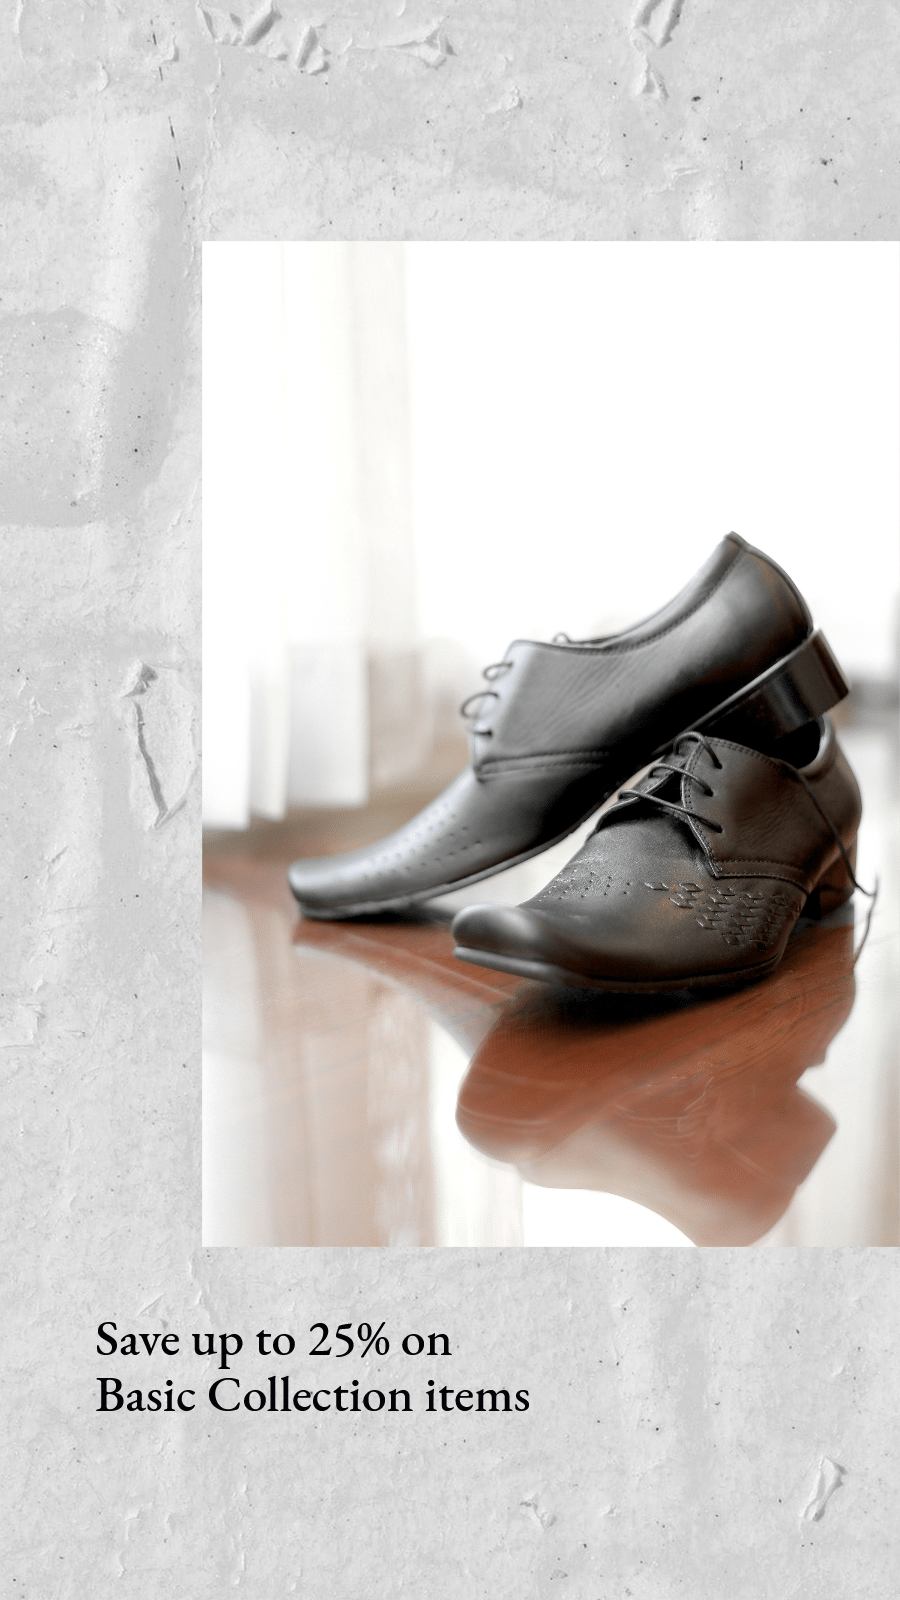 Pleated Paper Creative Men's Leather Shoes Display Sale Ecommerce Story预览效果